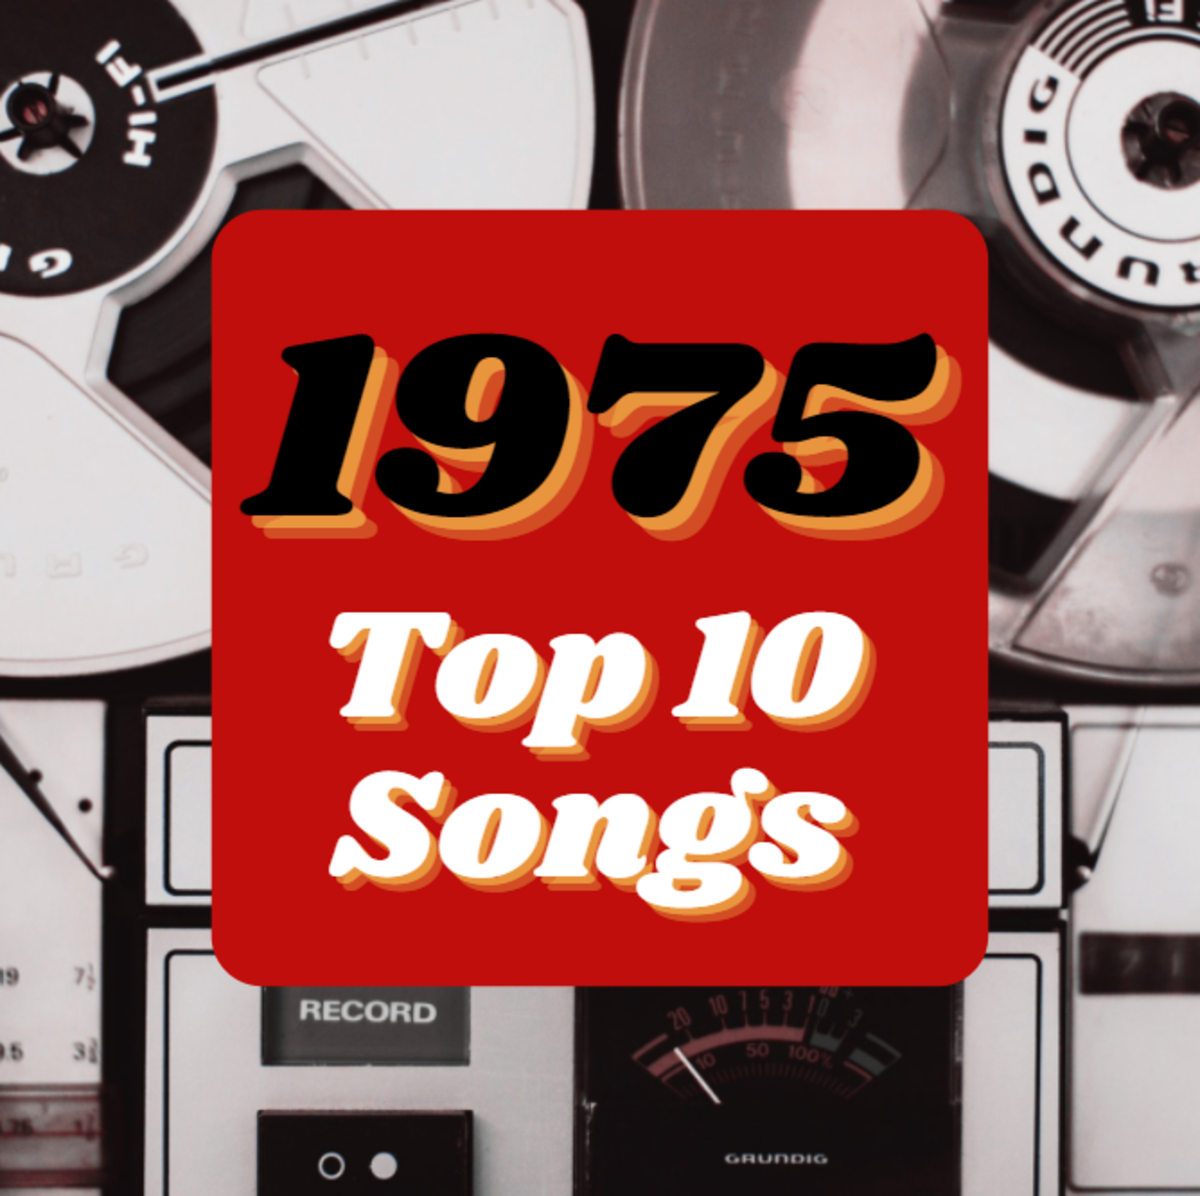 Check out 10 of the top hits from 1975!